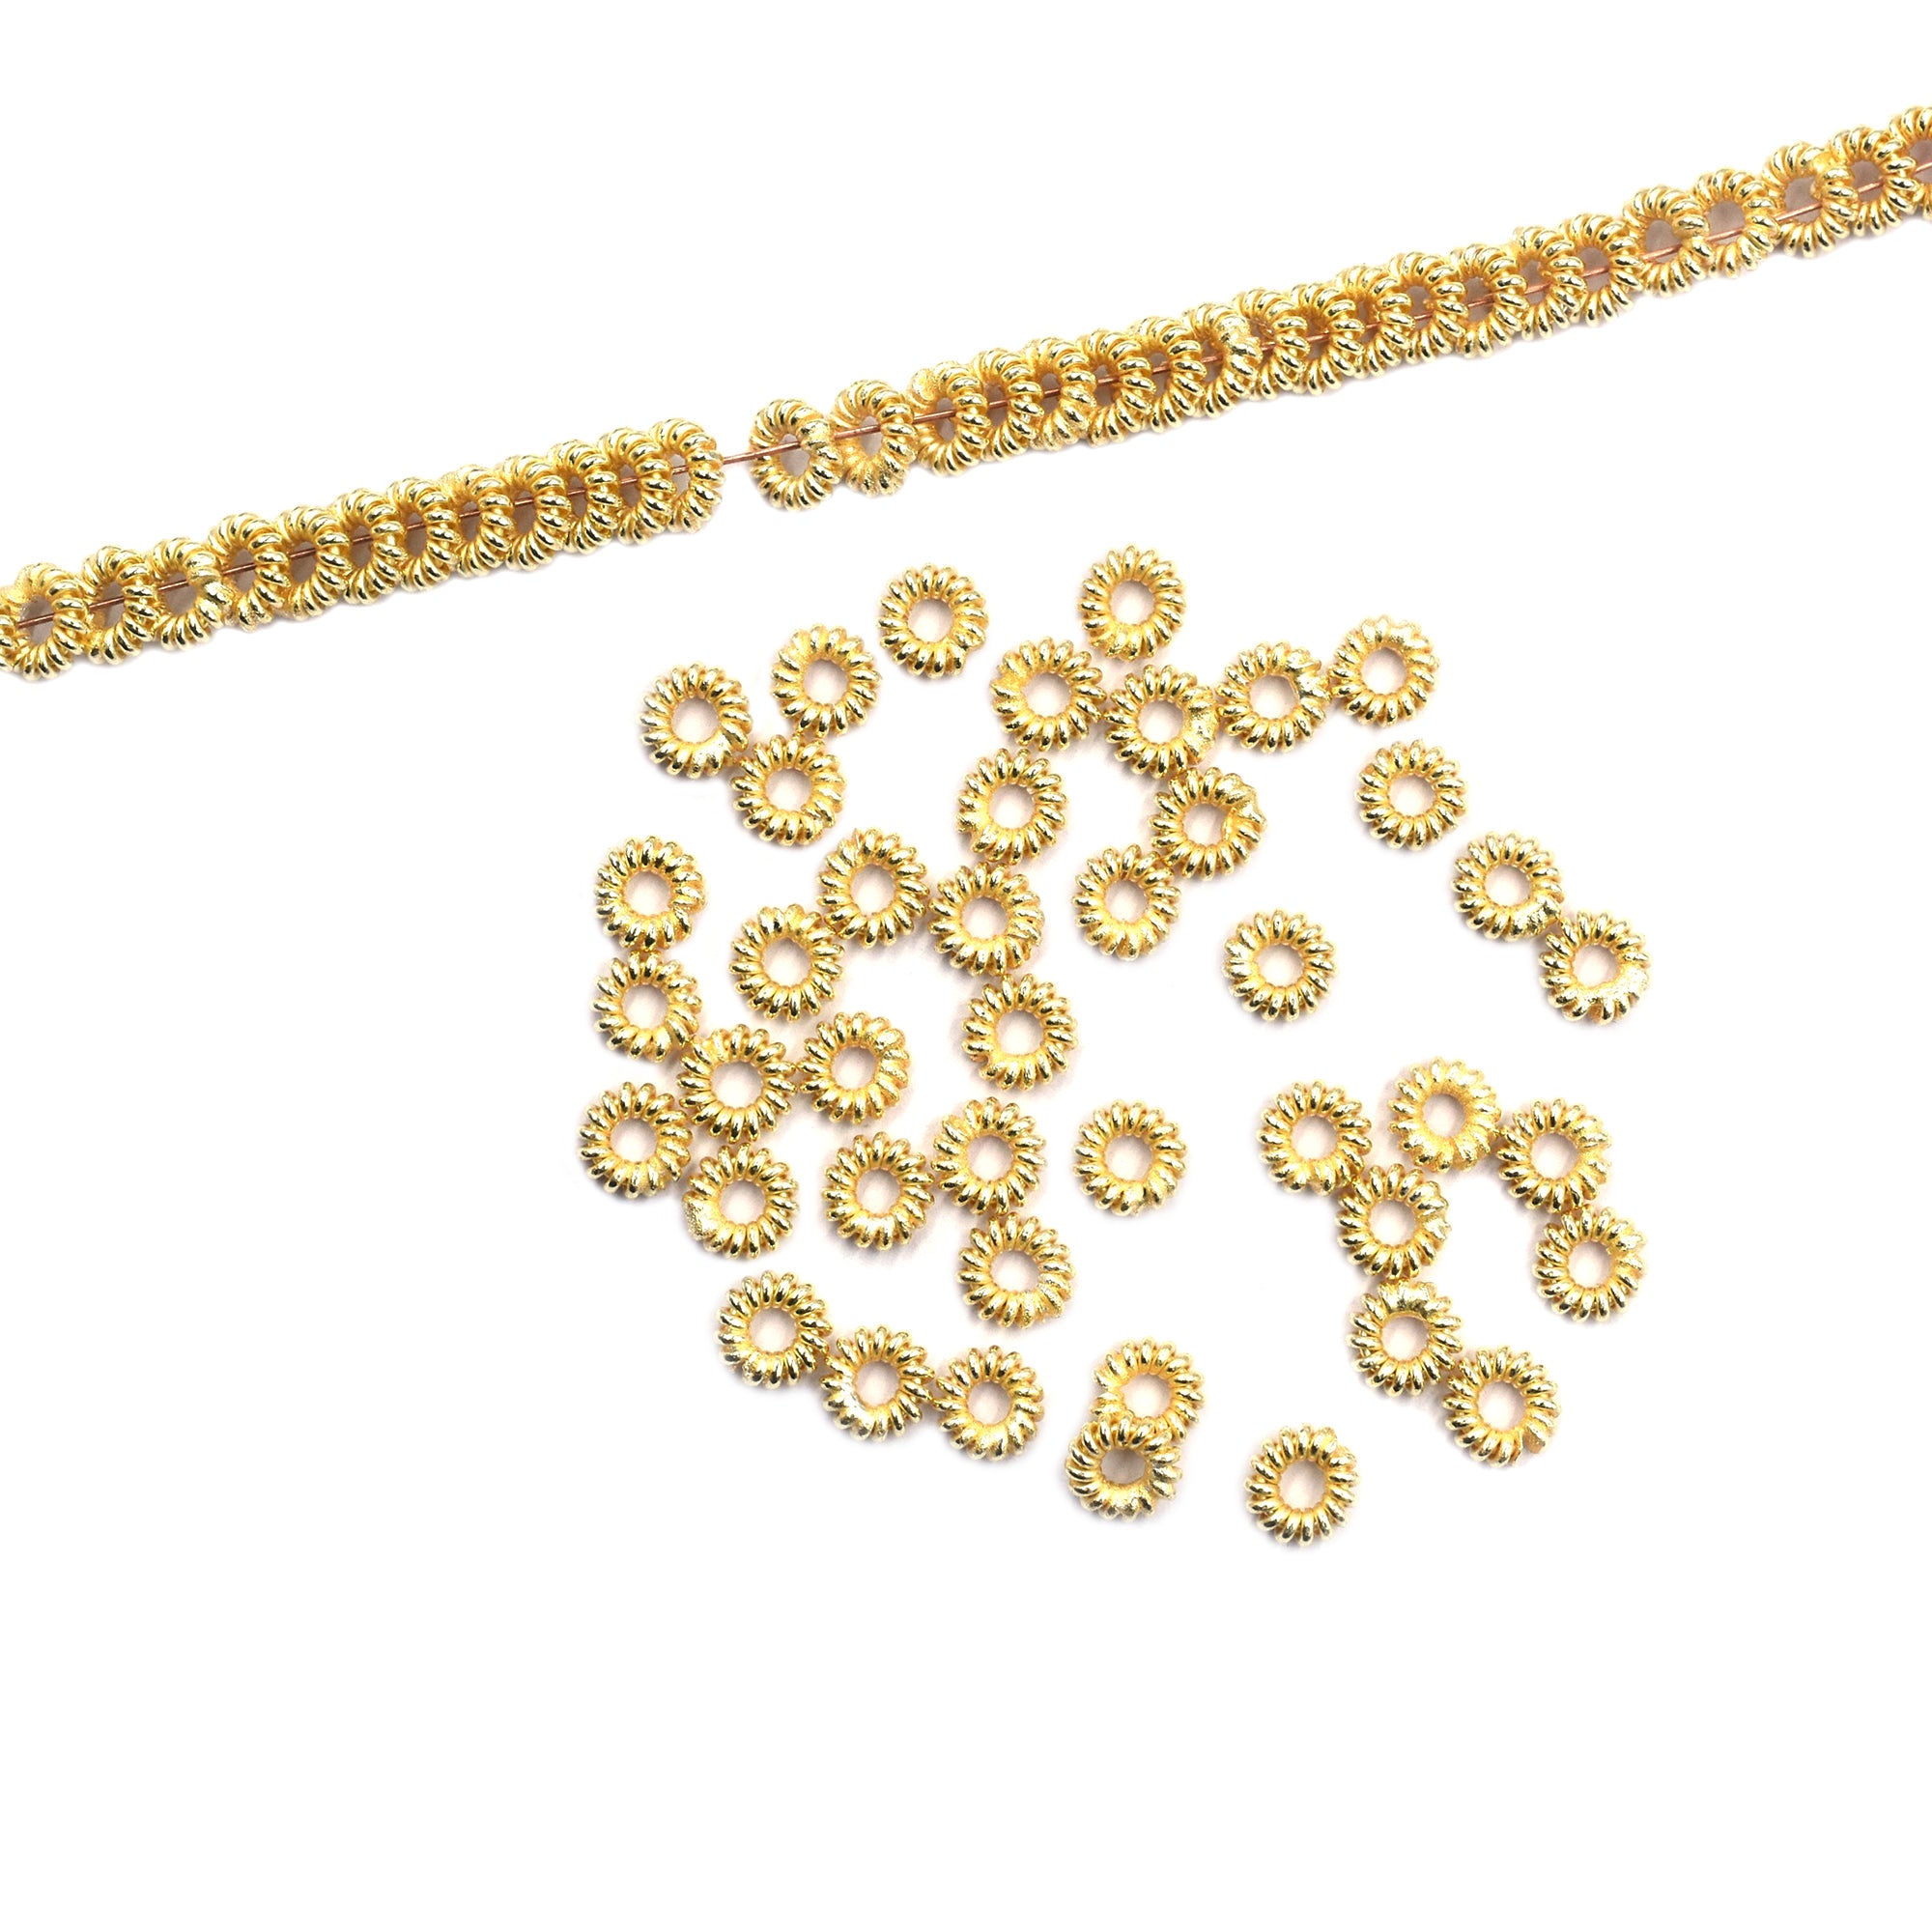 60 Pcs 6mm Twisted Wire Jump Ring Gold Plated Copper